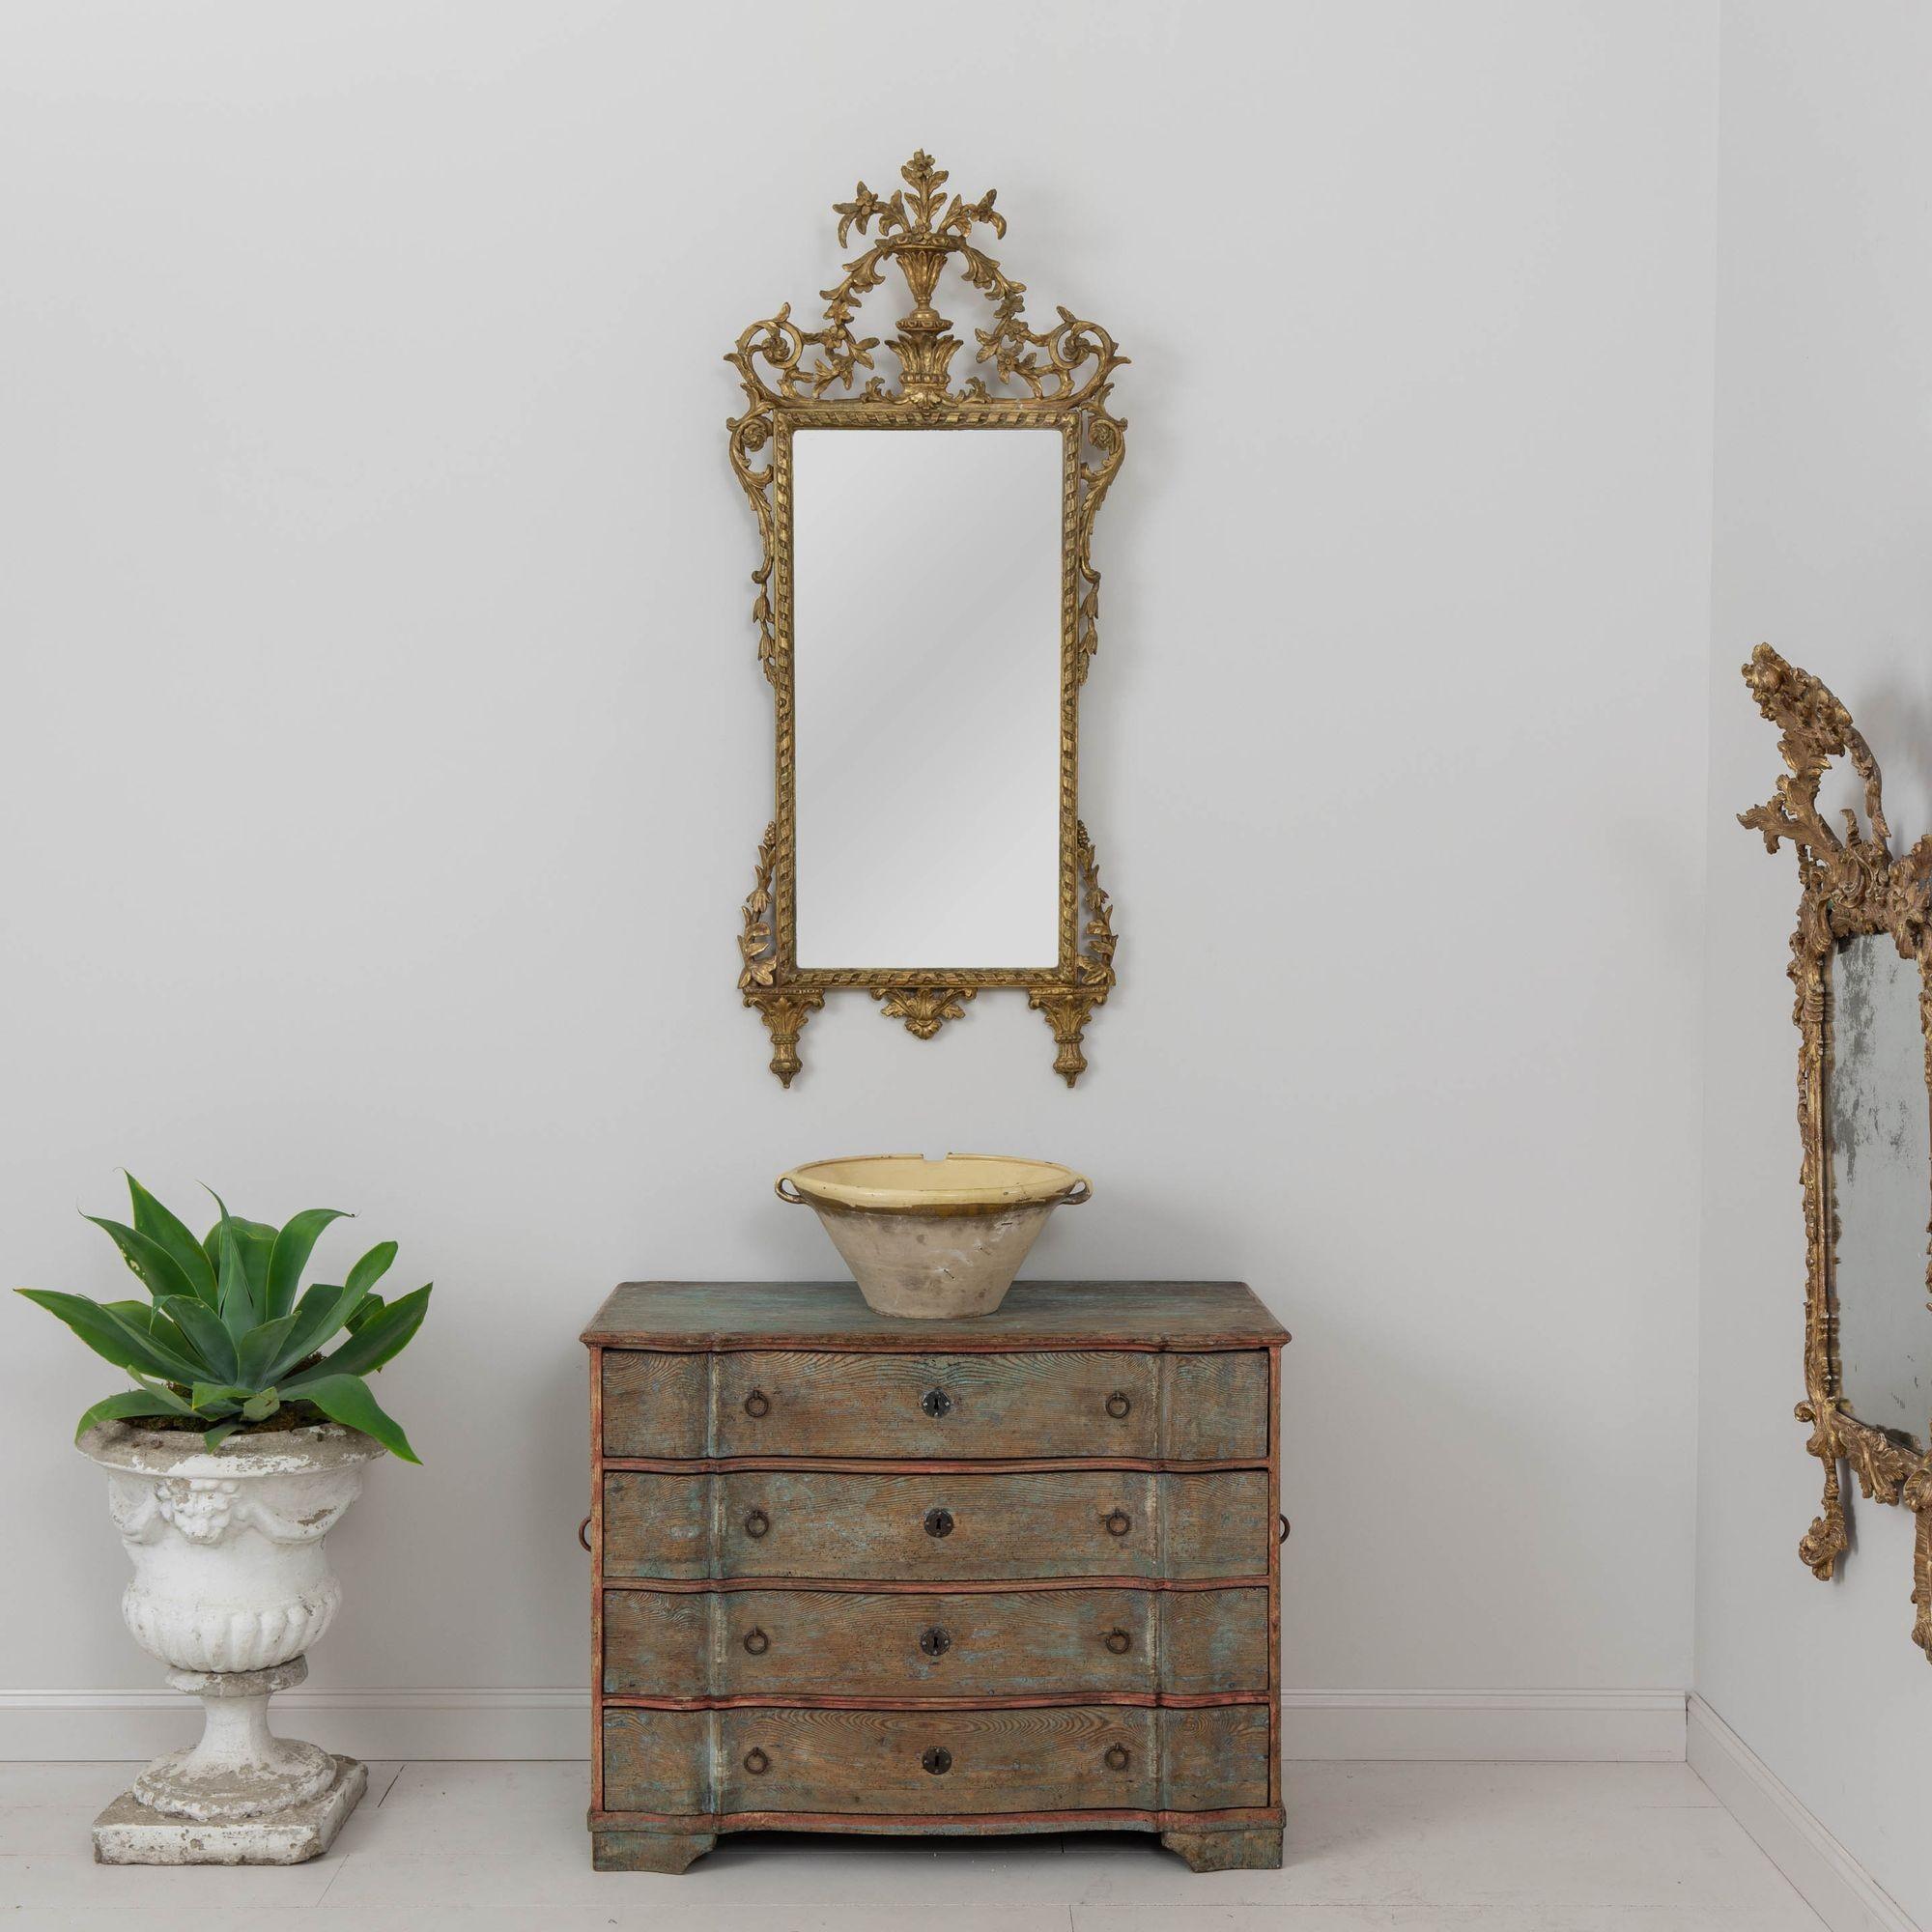 19th c. Italian Giltwood Mirror with Original Mirror Plate For Sale 10